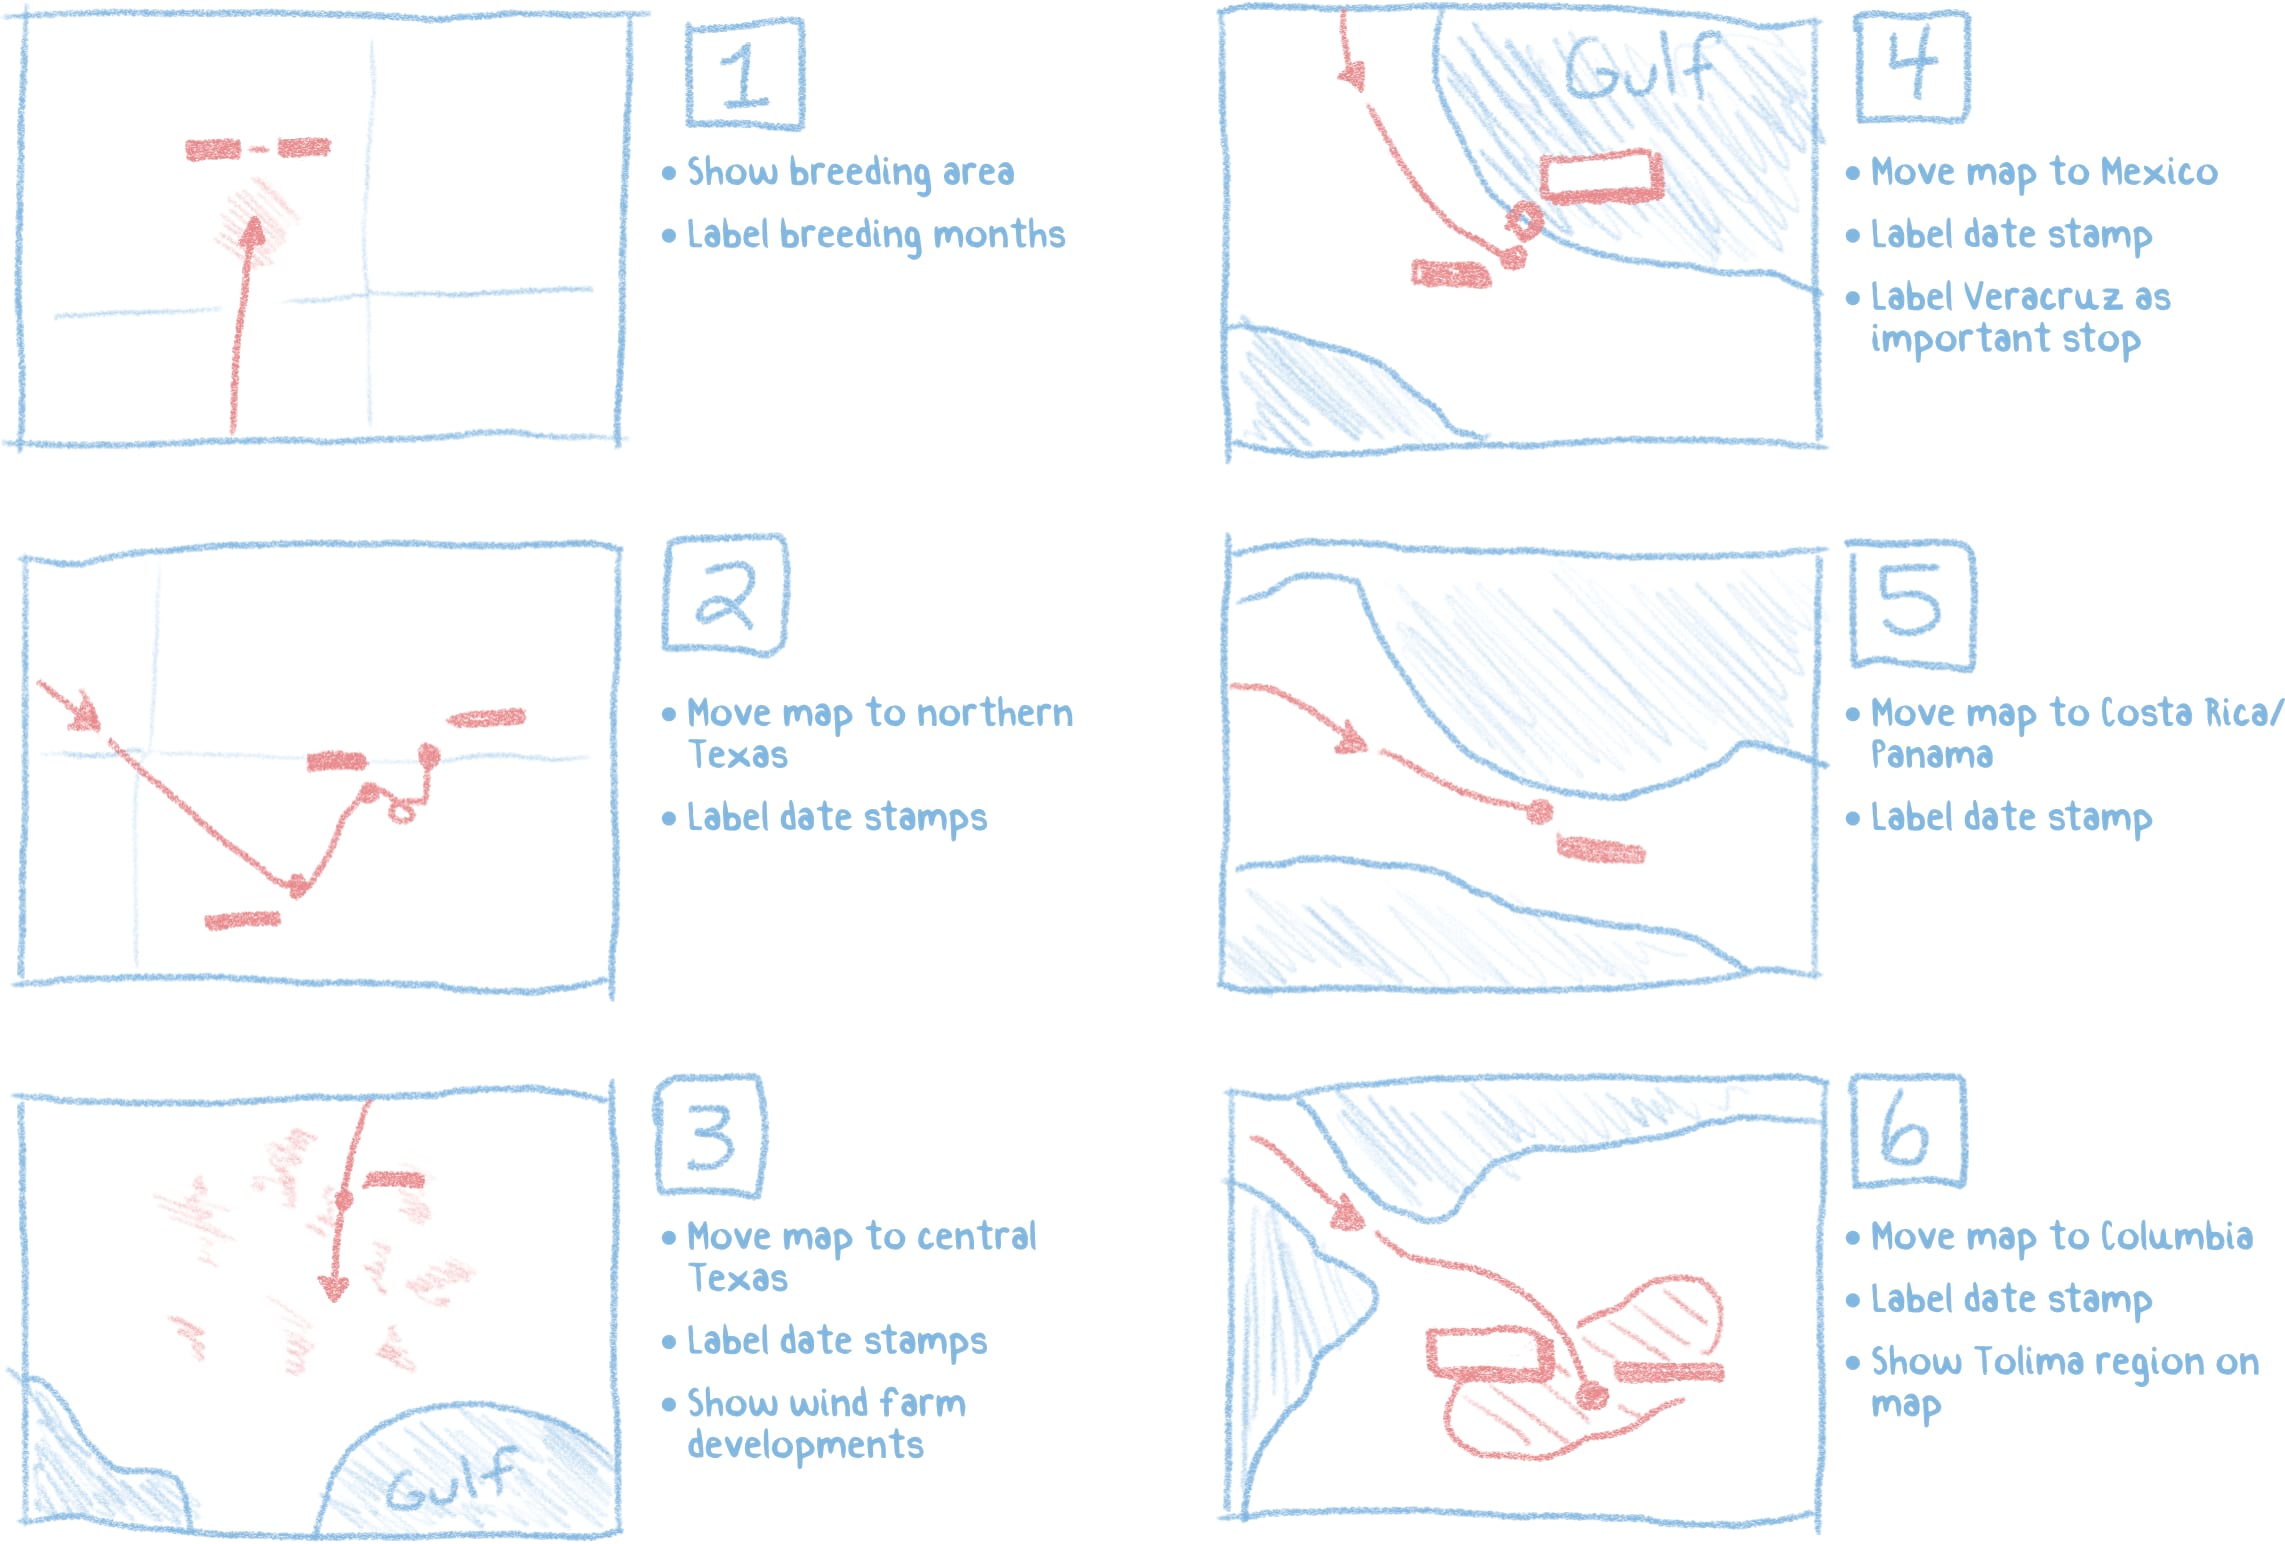 Sketched storyboard illustrating the various sequences of the animation.